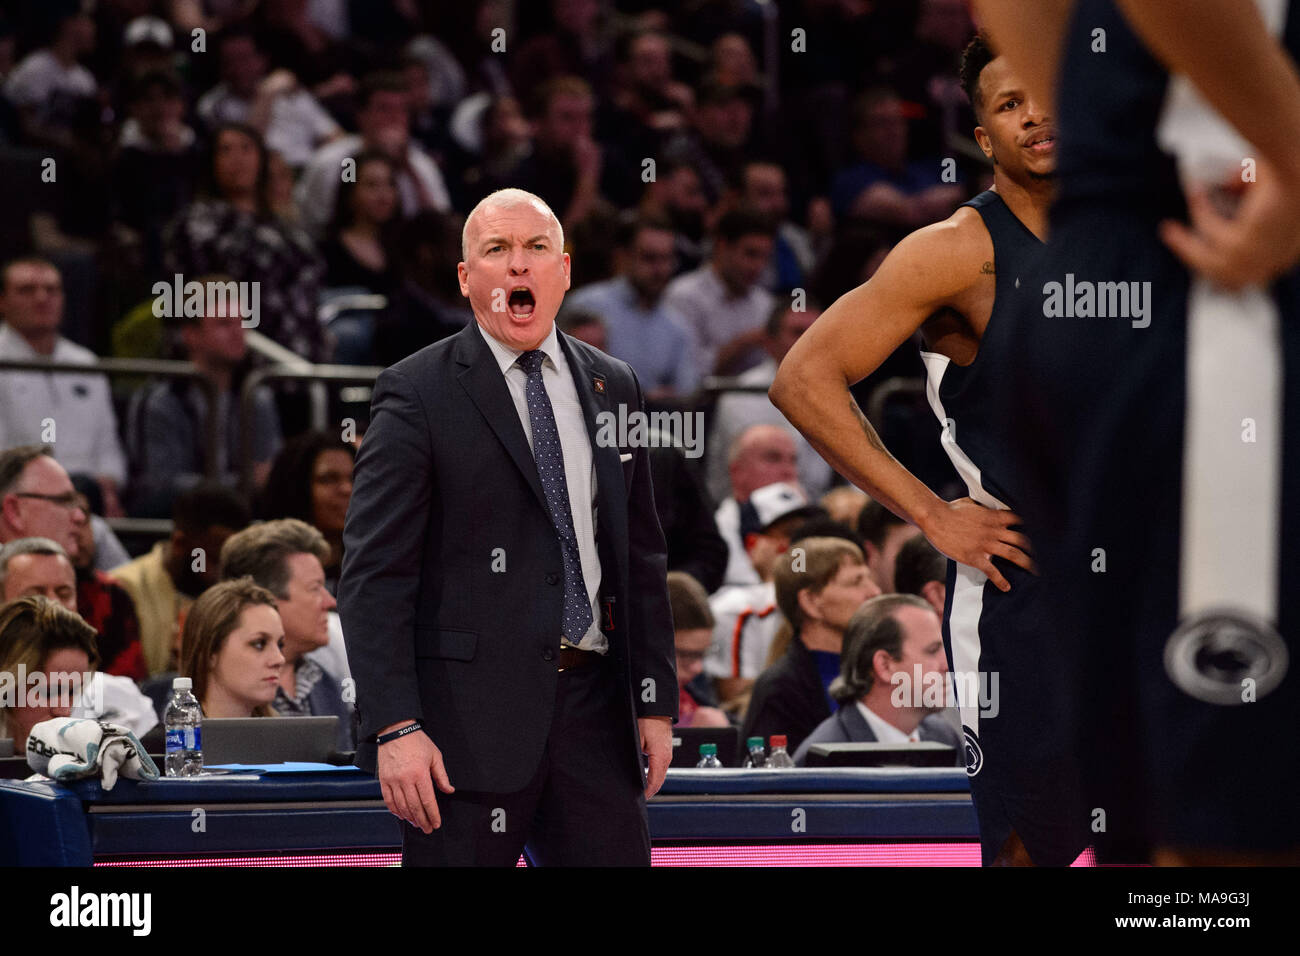 March 29, 2018: Penn State Nittany Lions head coach Pat Chambers reacts at the final of the 81st NIT Championship game between The Penn State Nittany Lions and The Utah Utes at Madison Square Garden, New York, New York. The Penn State Nittany Lions defeat The Utah Utes 82-66 to win The NIT Championship. Mandatory credit: Kostas Lymperopoulos/CSM Stock Photo